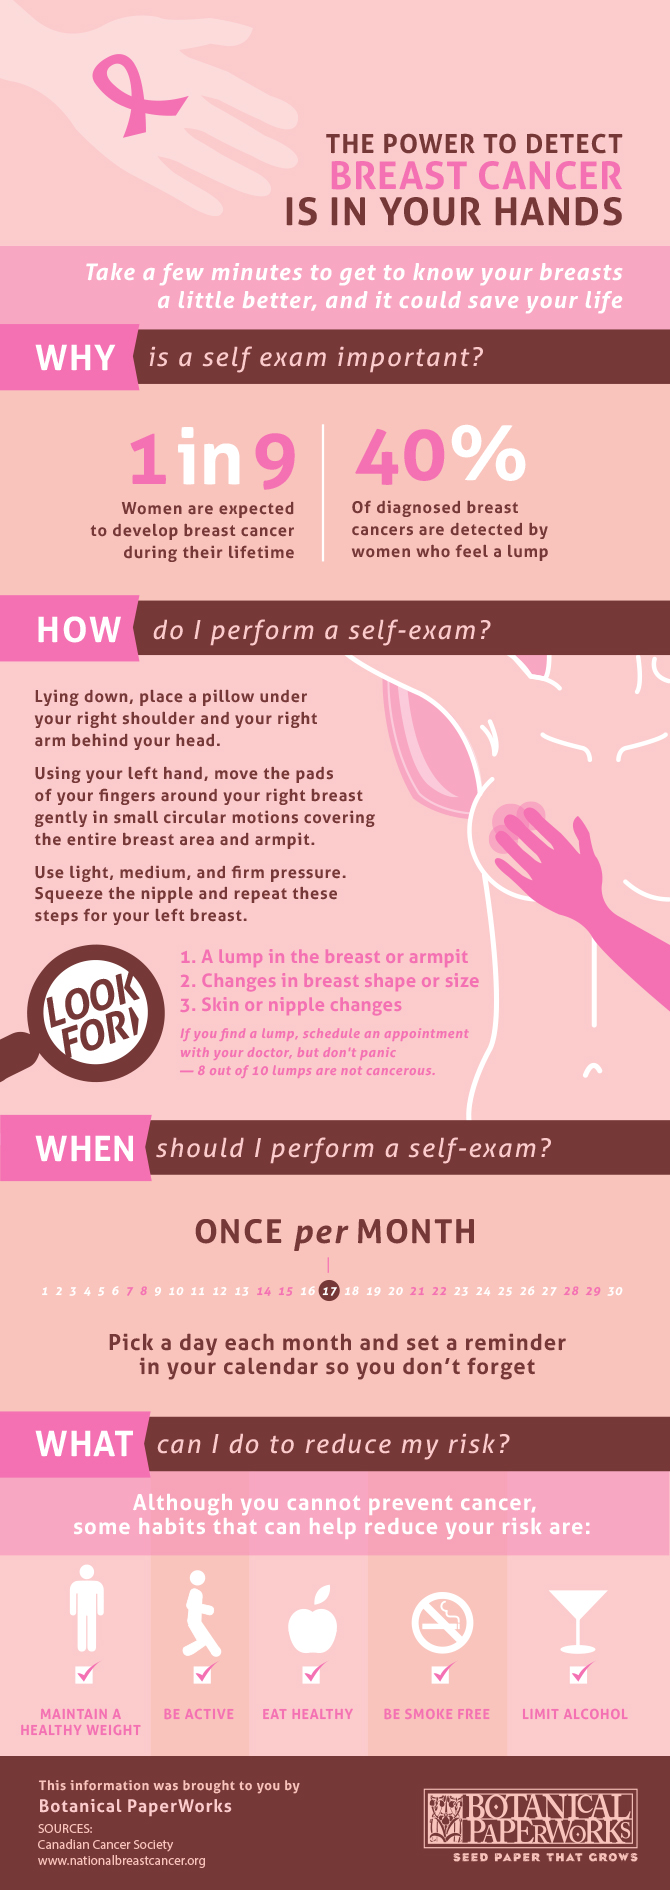 October is Breast Cancer Awareness Month, make sure you are in the know about your breast health!